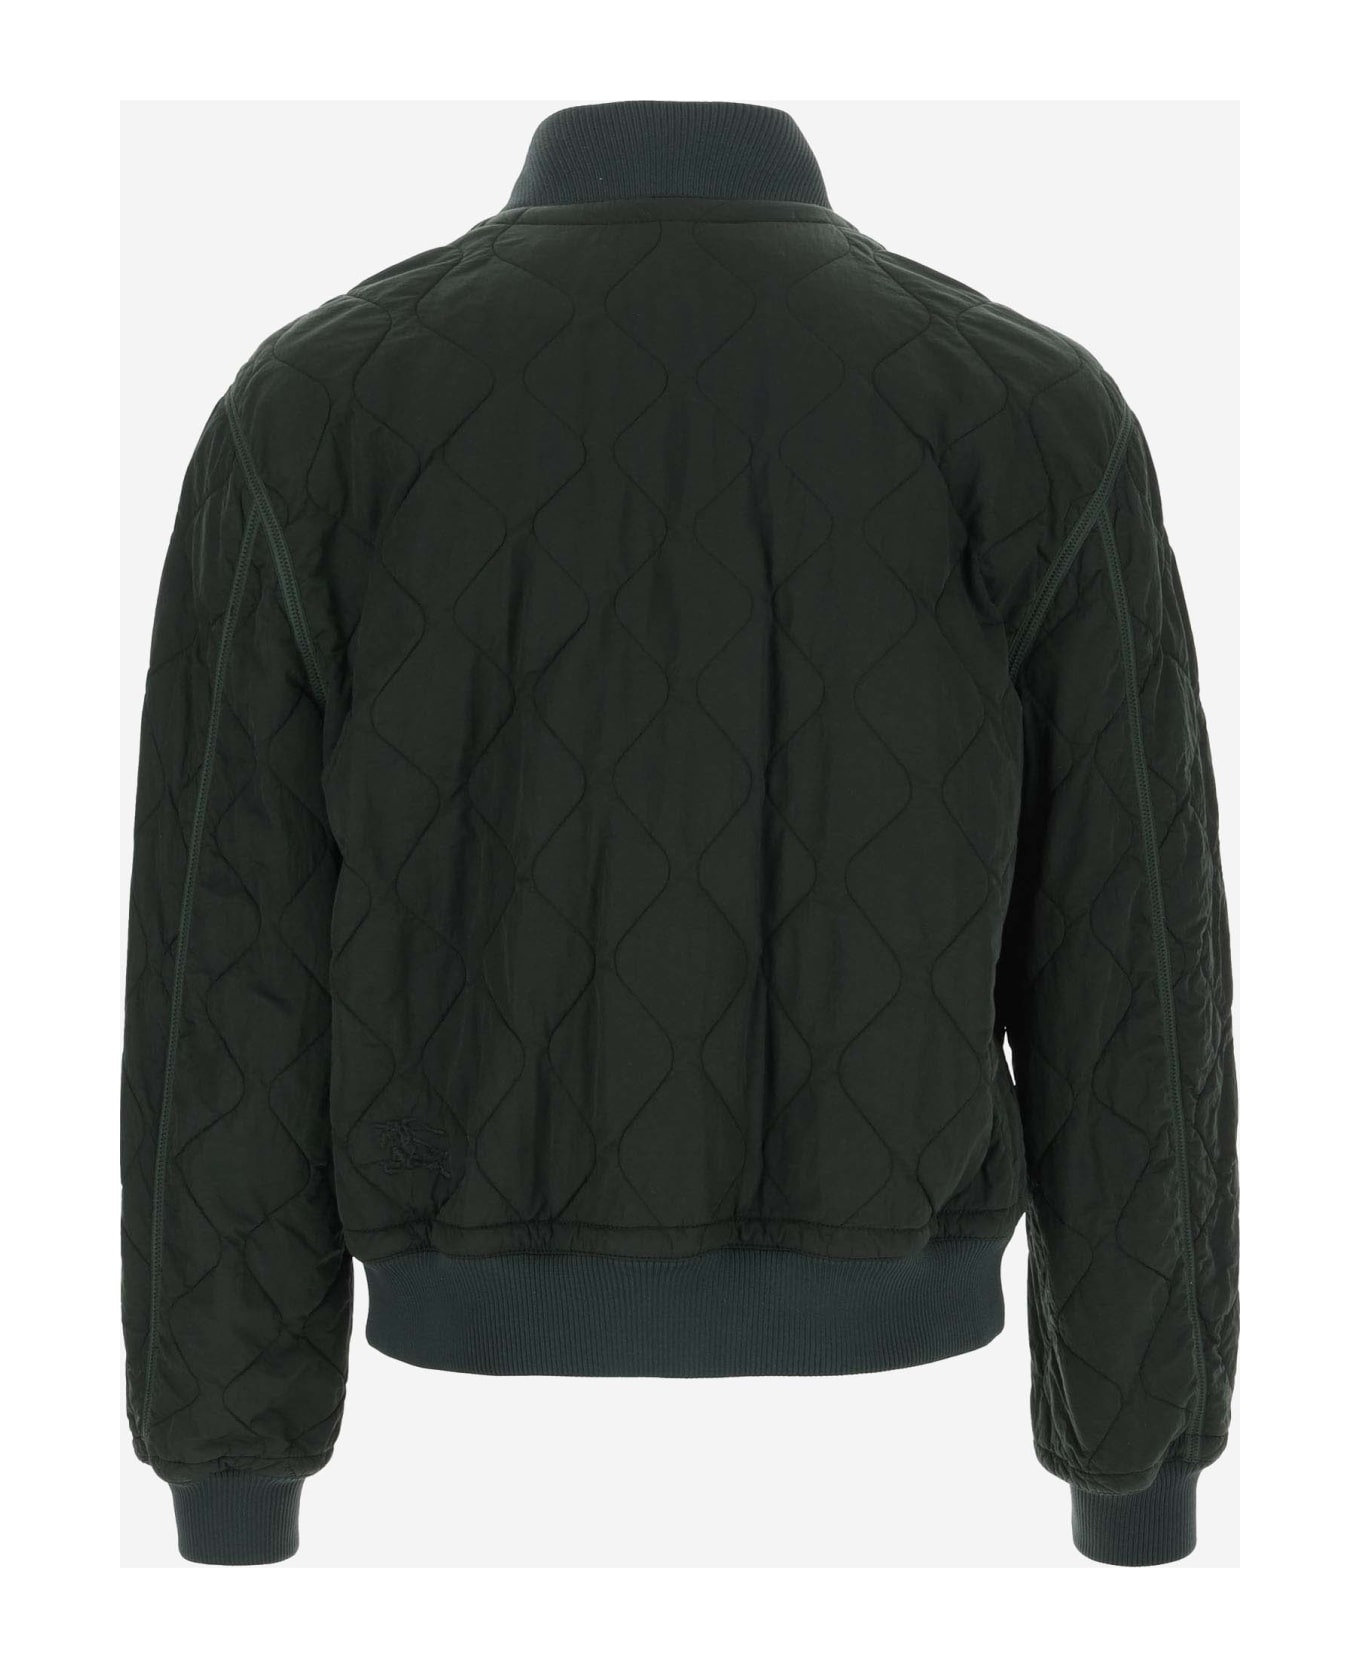 Burberry Quilted Nylon Bomber Jacket - Green